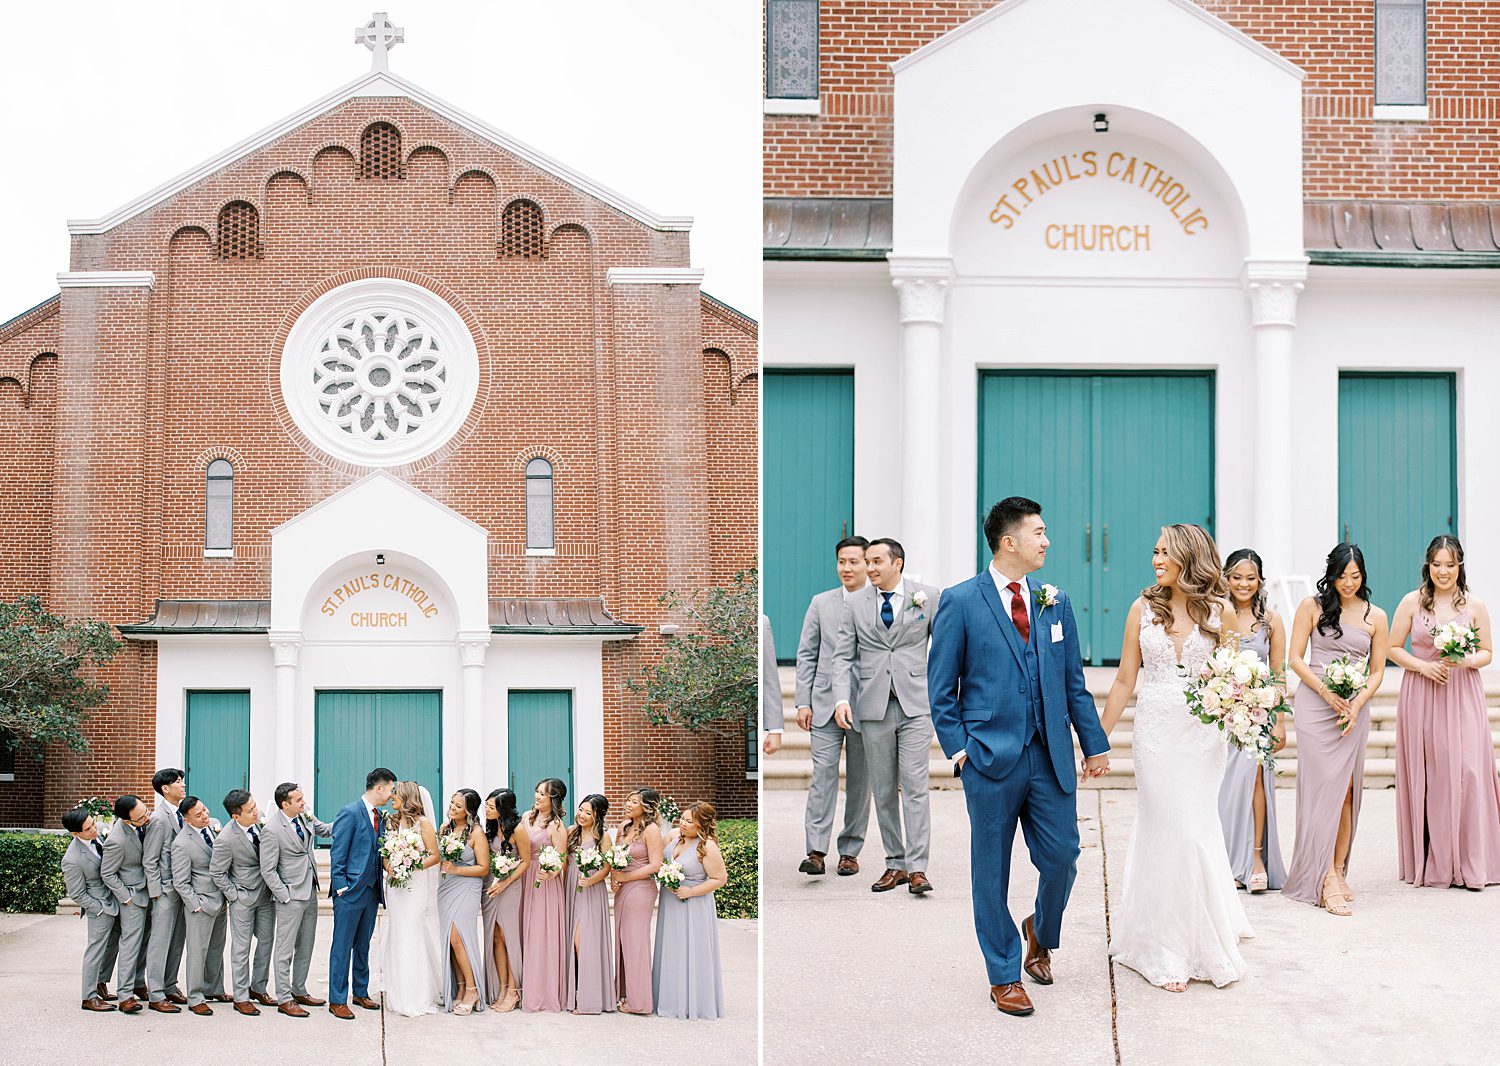 newlyweds hold hands walking with wedding party by teal doors at St. Paul's Catholic Church in Tampa FL